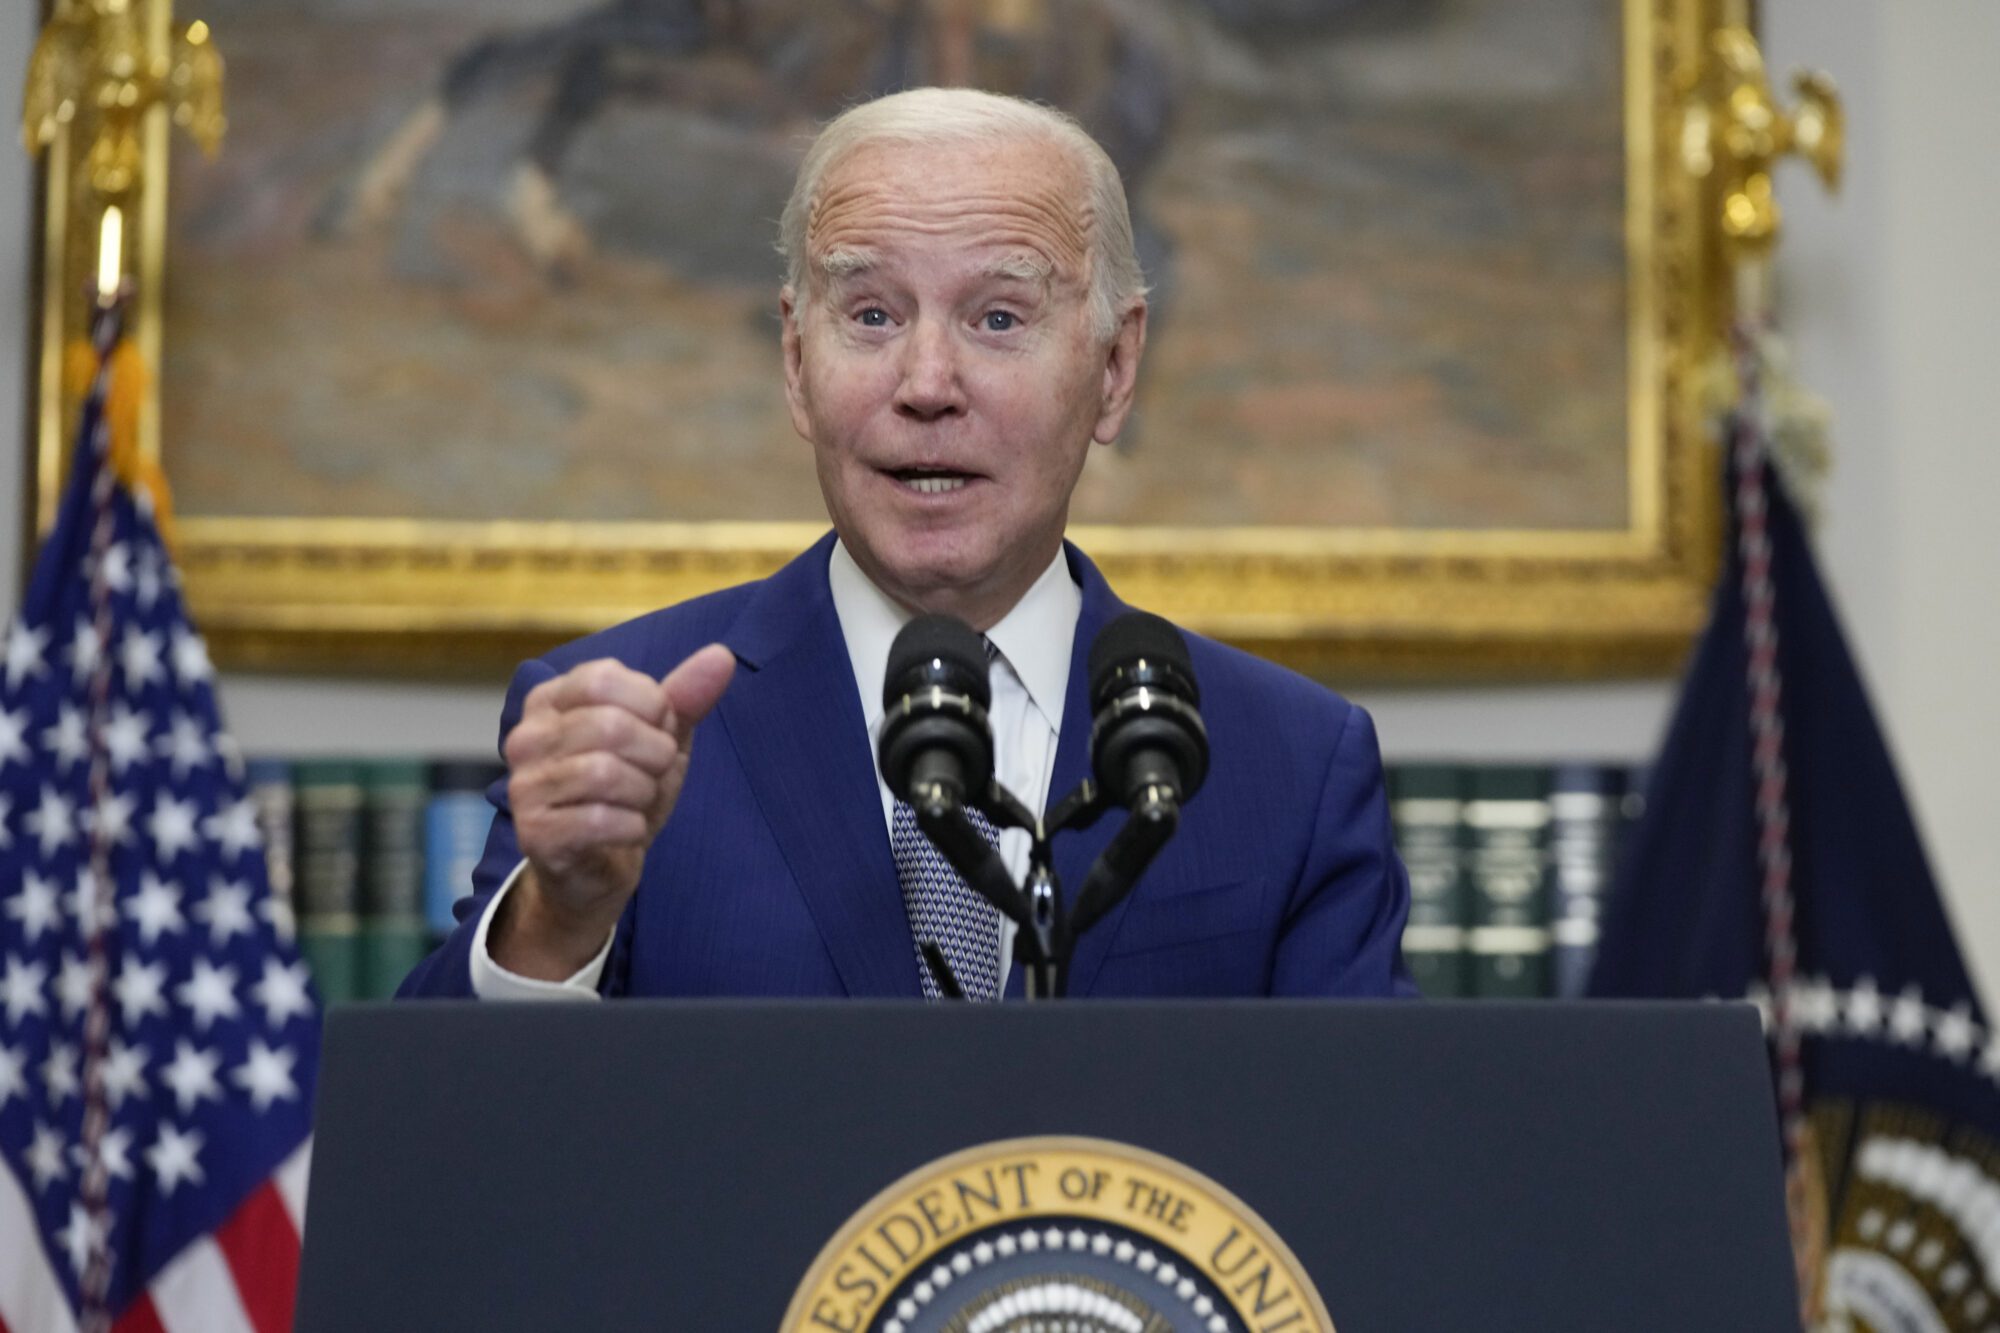 Mississippi among states challenging Biden Administration's broadened Title IX rule